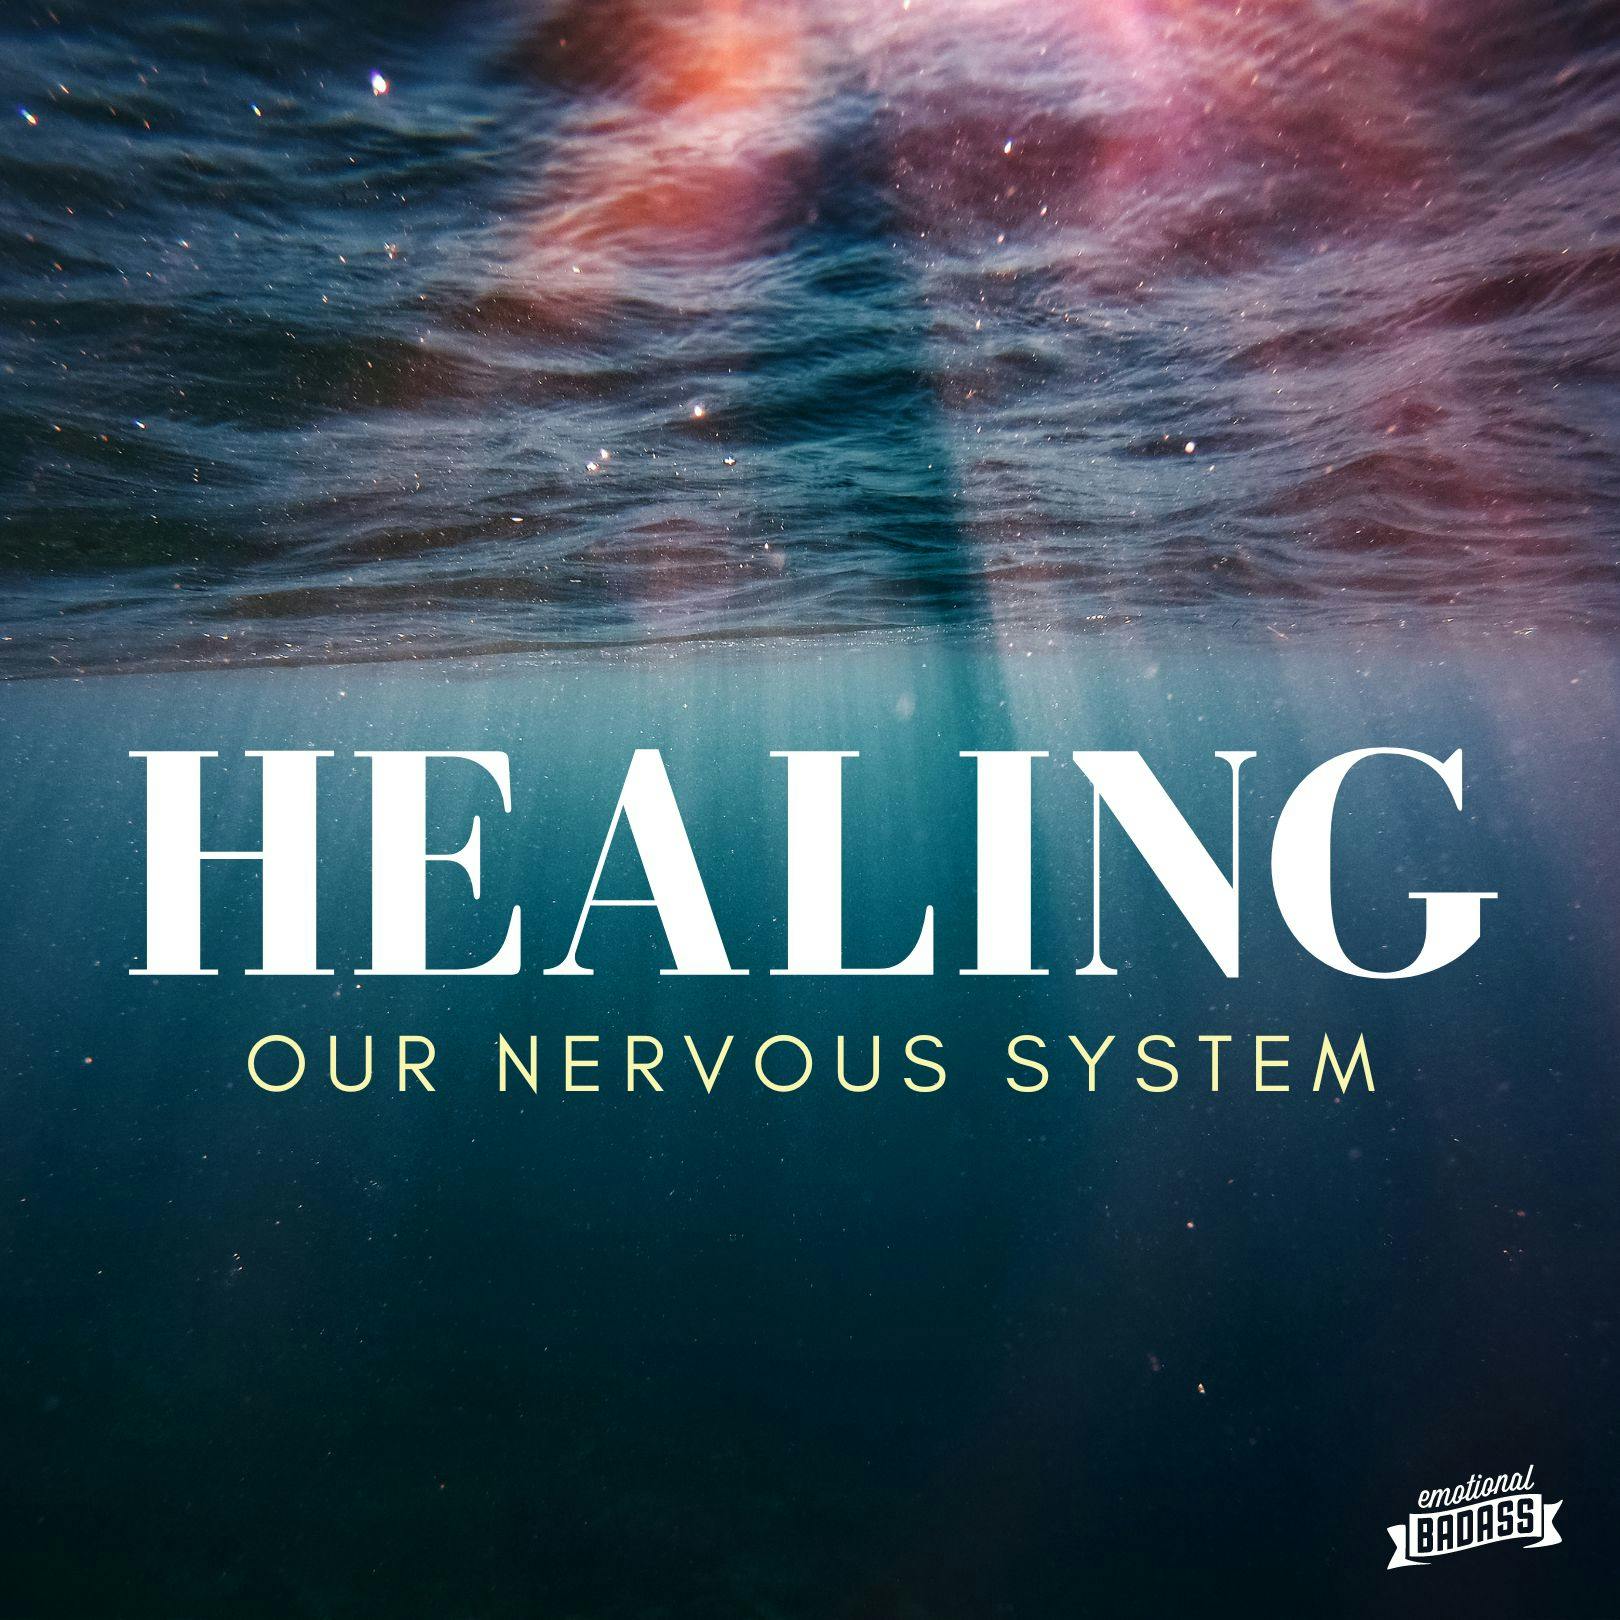 Healing your Nervous System by Rejecting Stress and Practicing Inner Peace